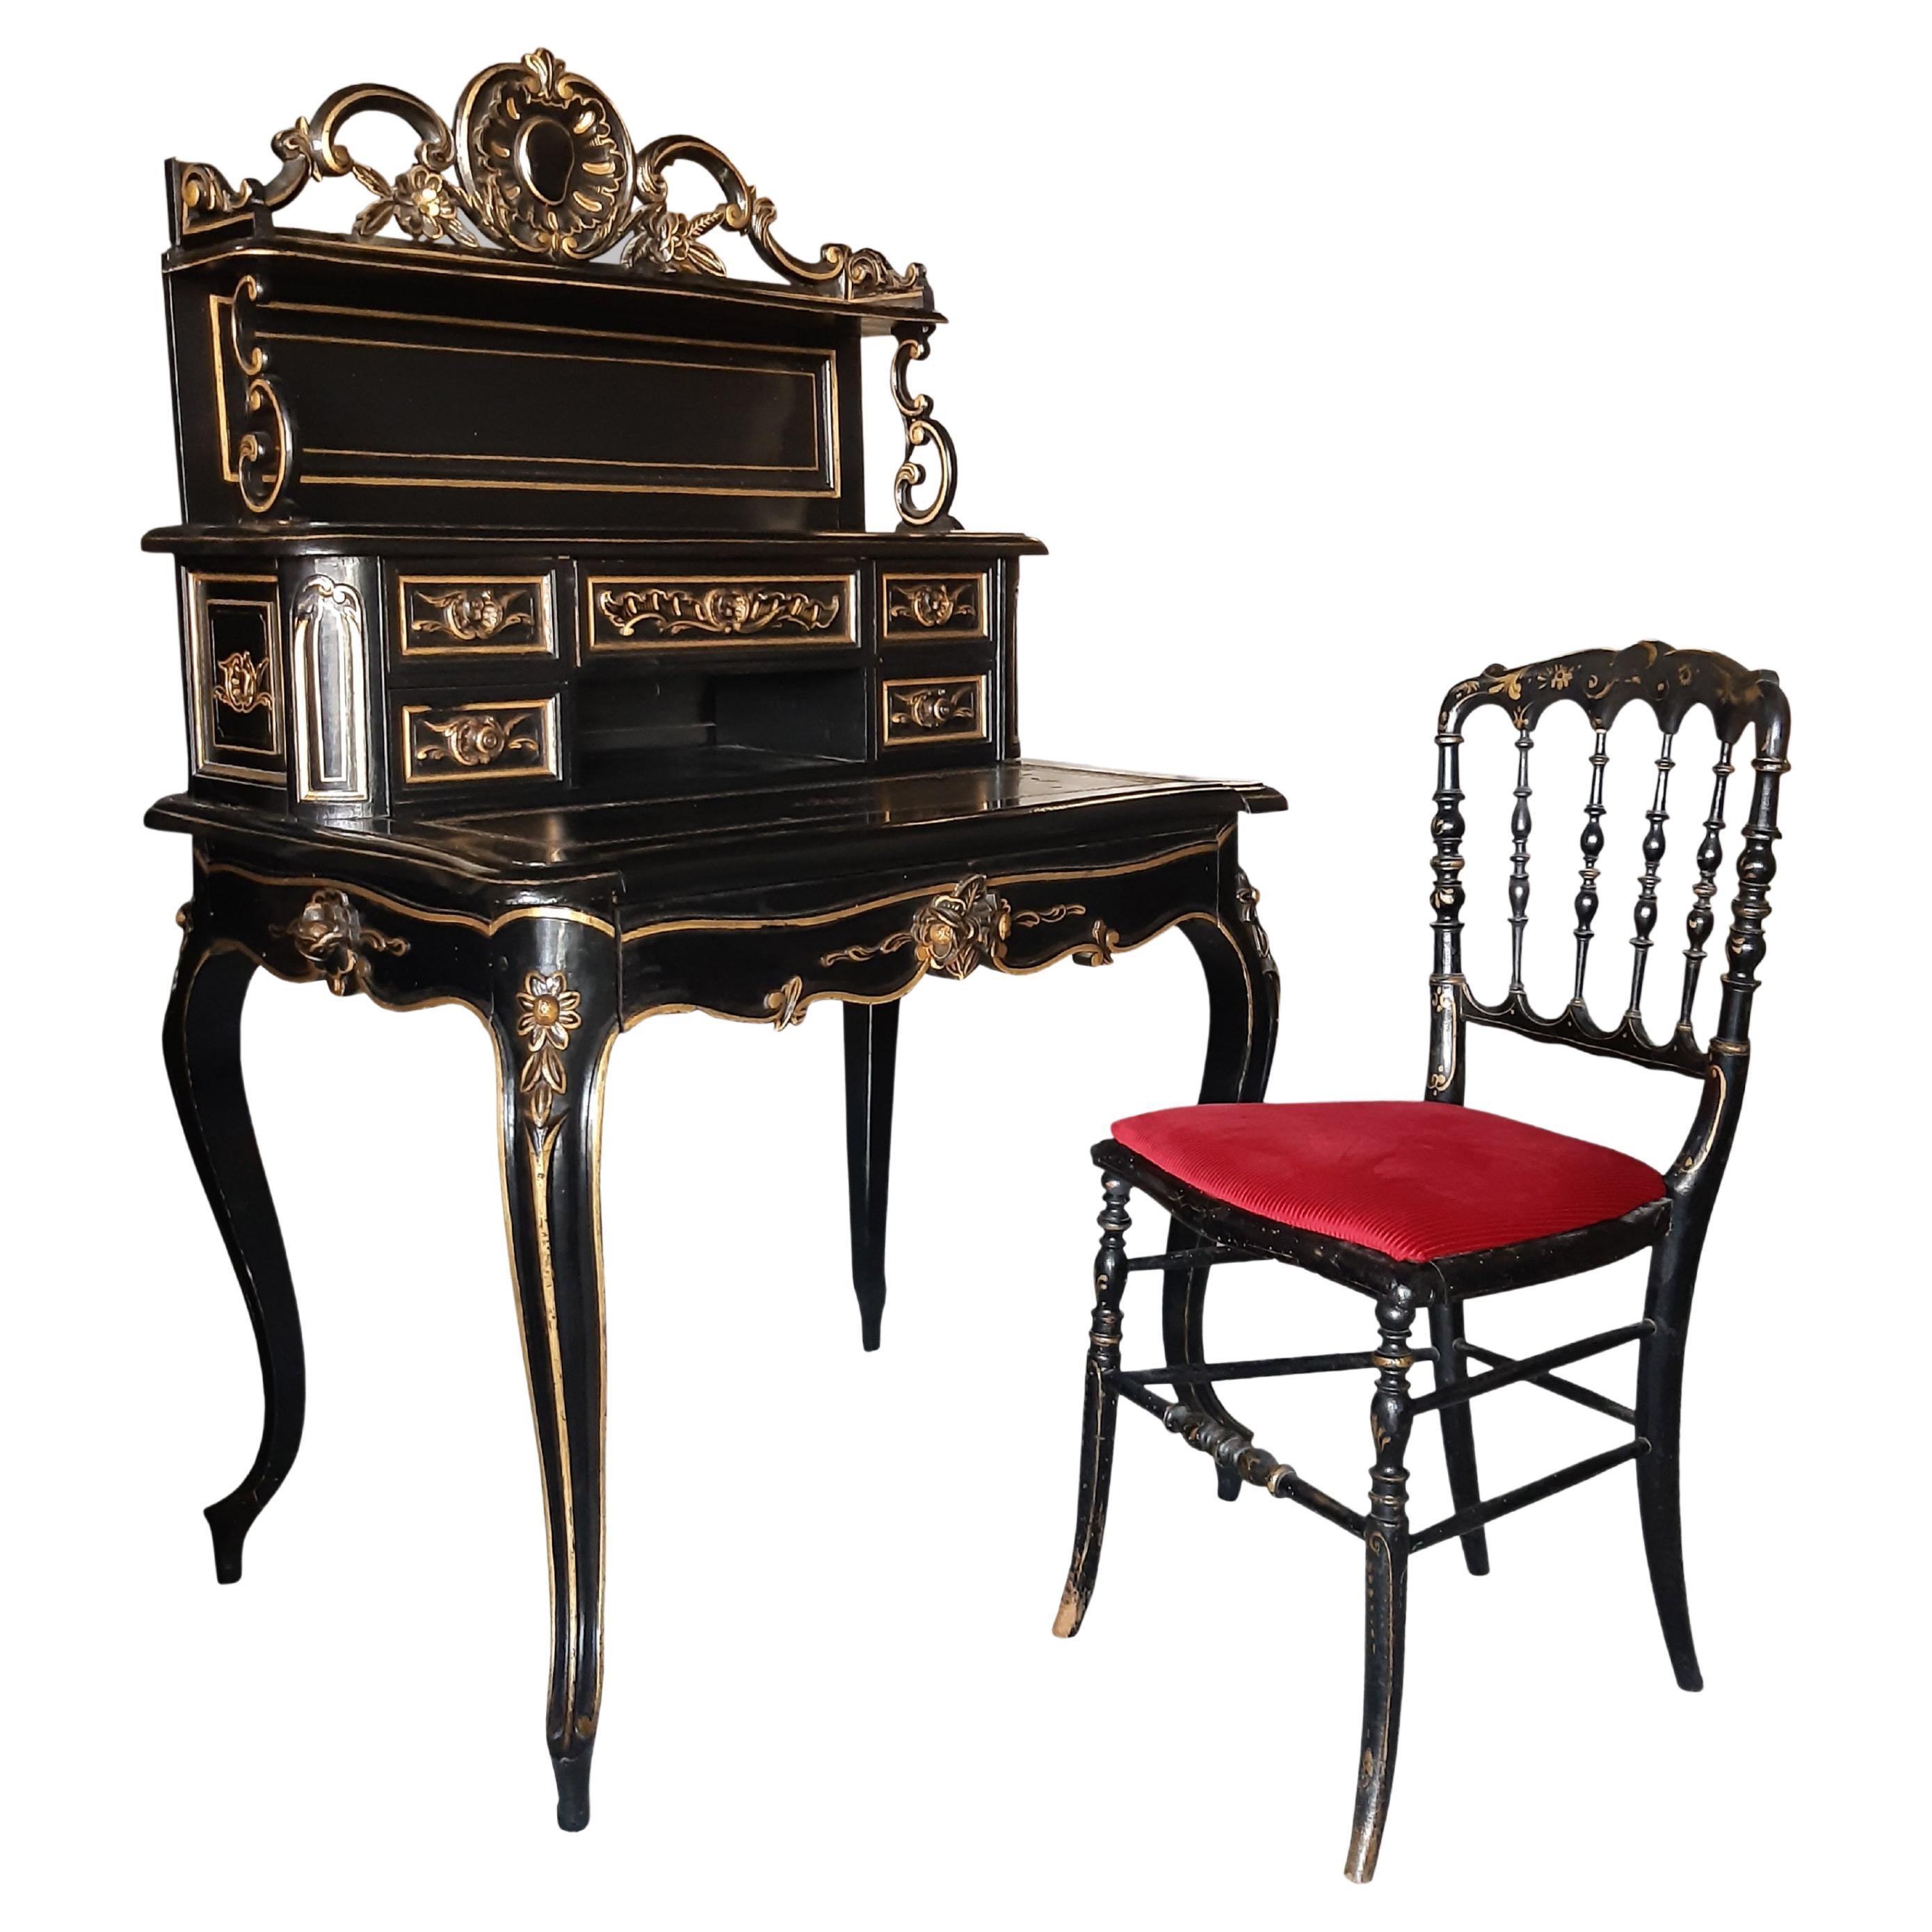 Secretaire Happiness of the Day Small Black Desk Napoleon III french antiquity